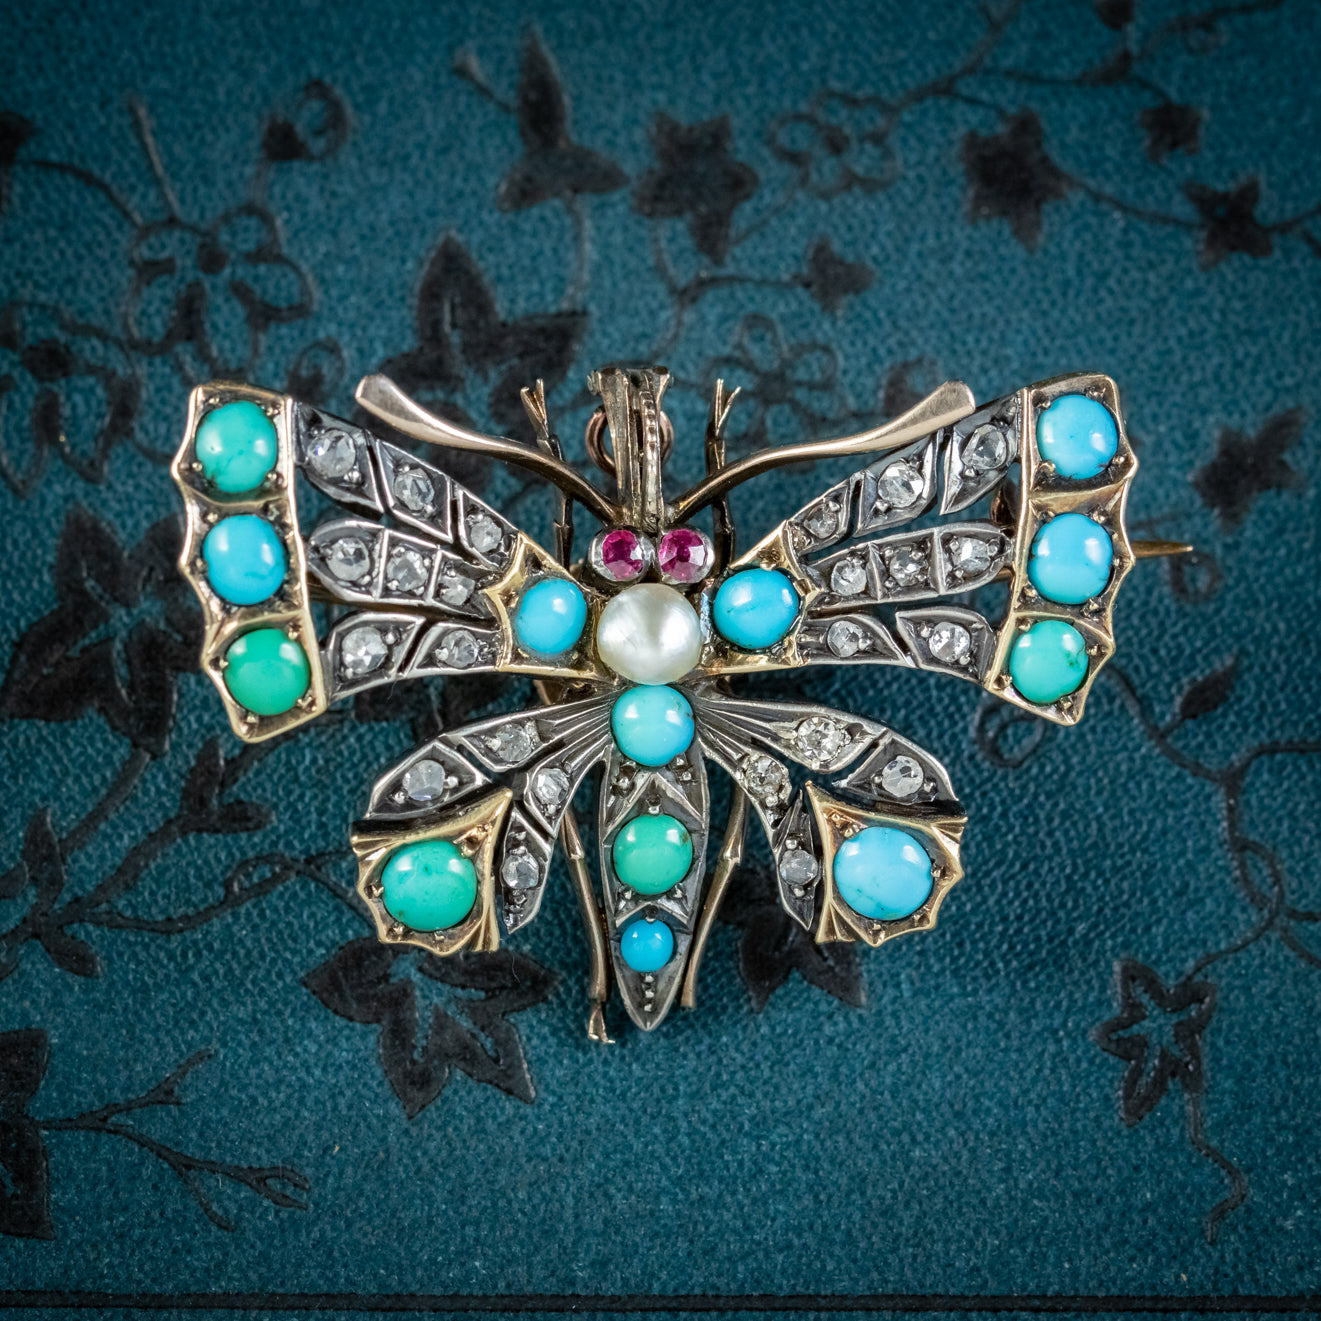 Antique Insect Jewellery